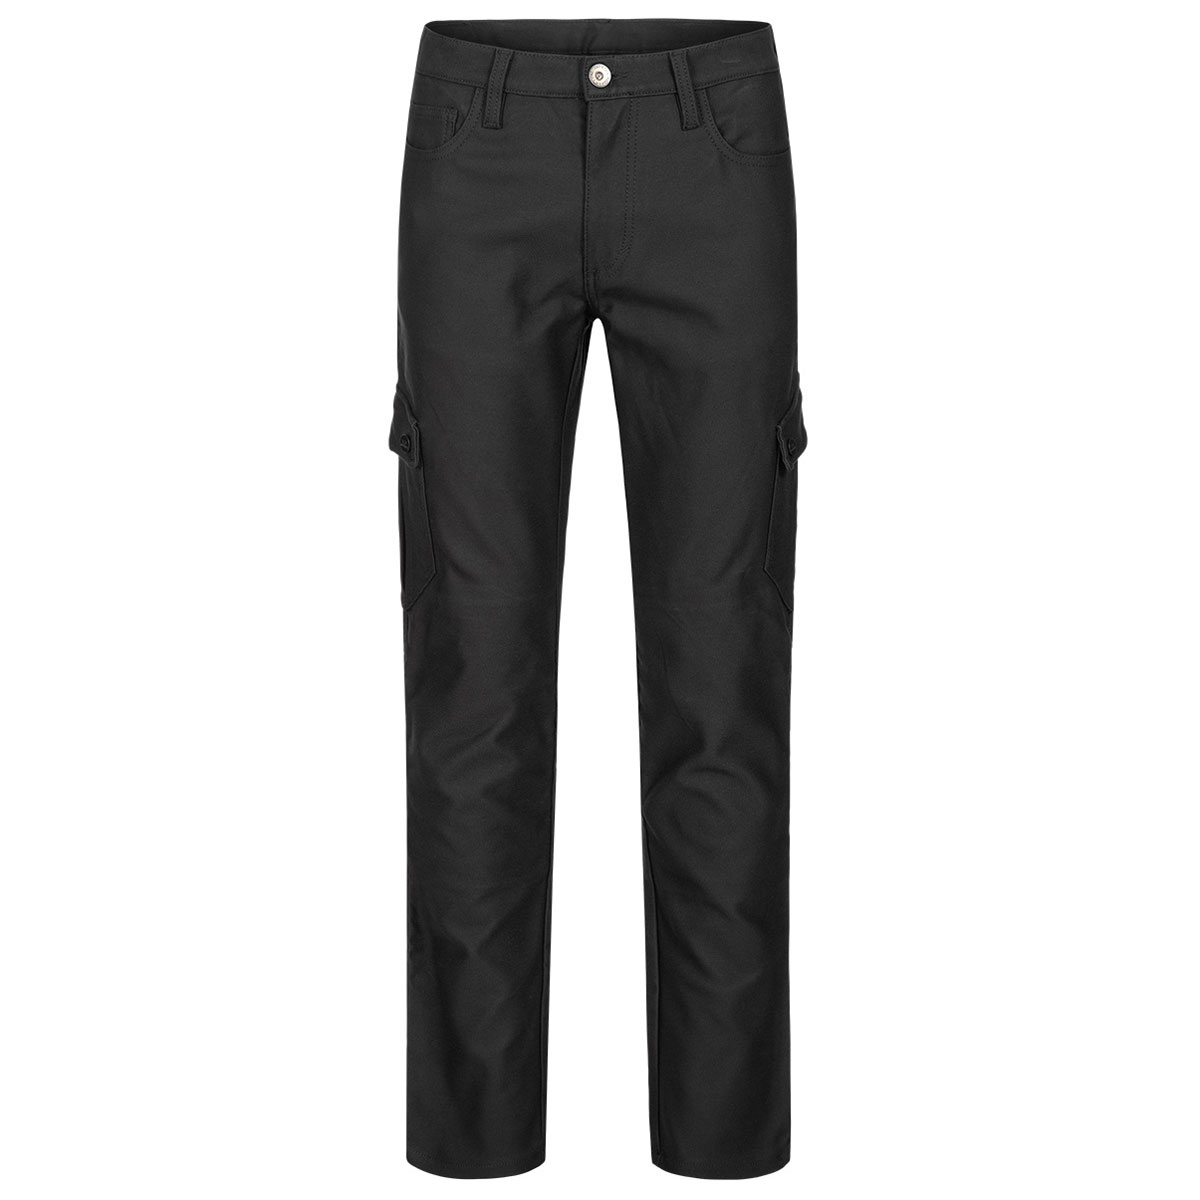 Rokker Textile Trousers